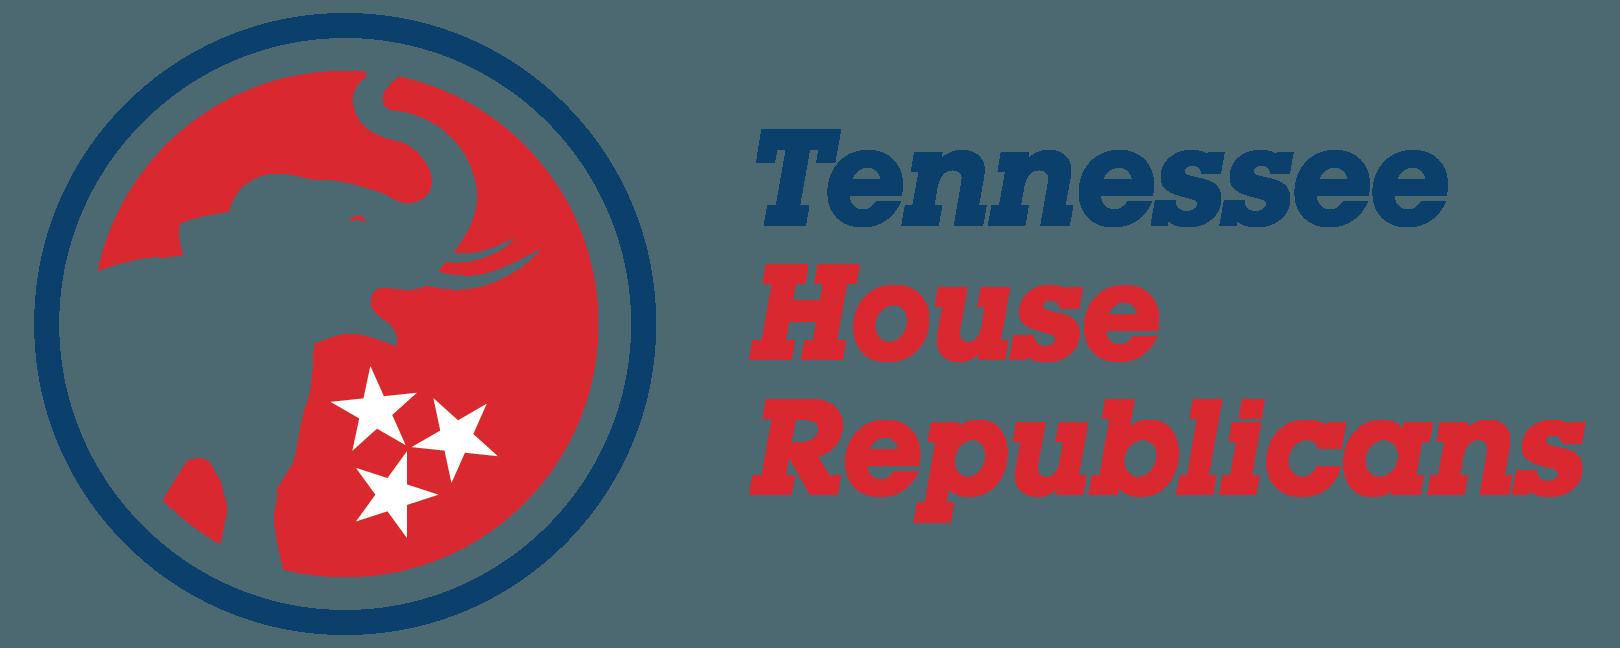 Red Carter Logo - Rep. Mike Carter's Newsroom - Tennessee House Republicans